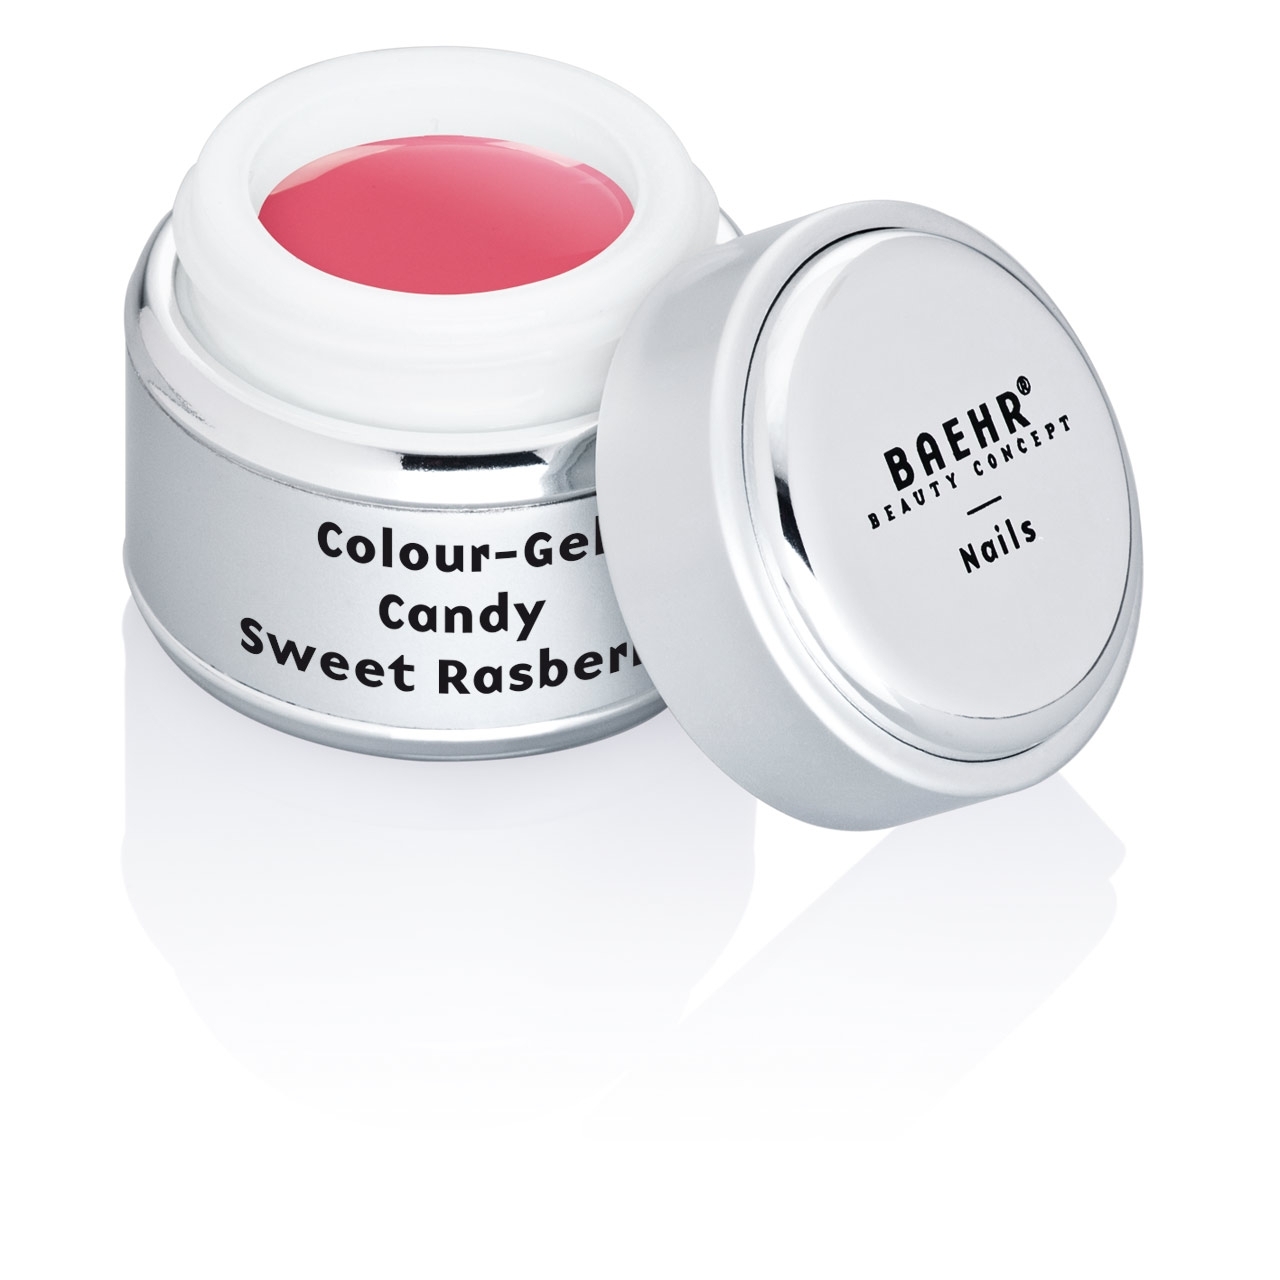 BAEHR BEAUTY CONCEPT - NAILS Colour-Gel Candy Sweet Rasberry 5 ml